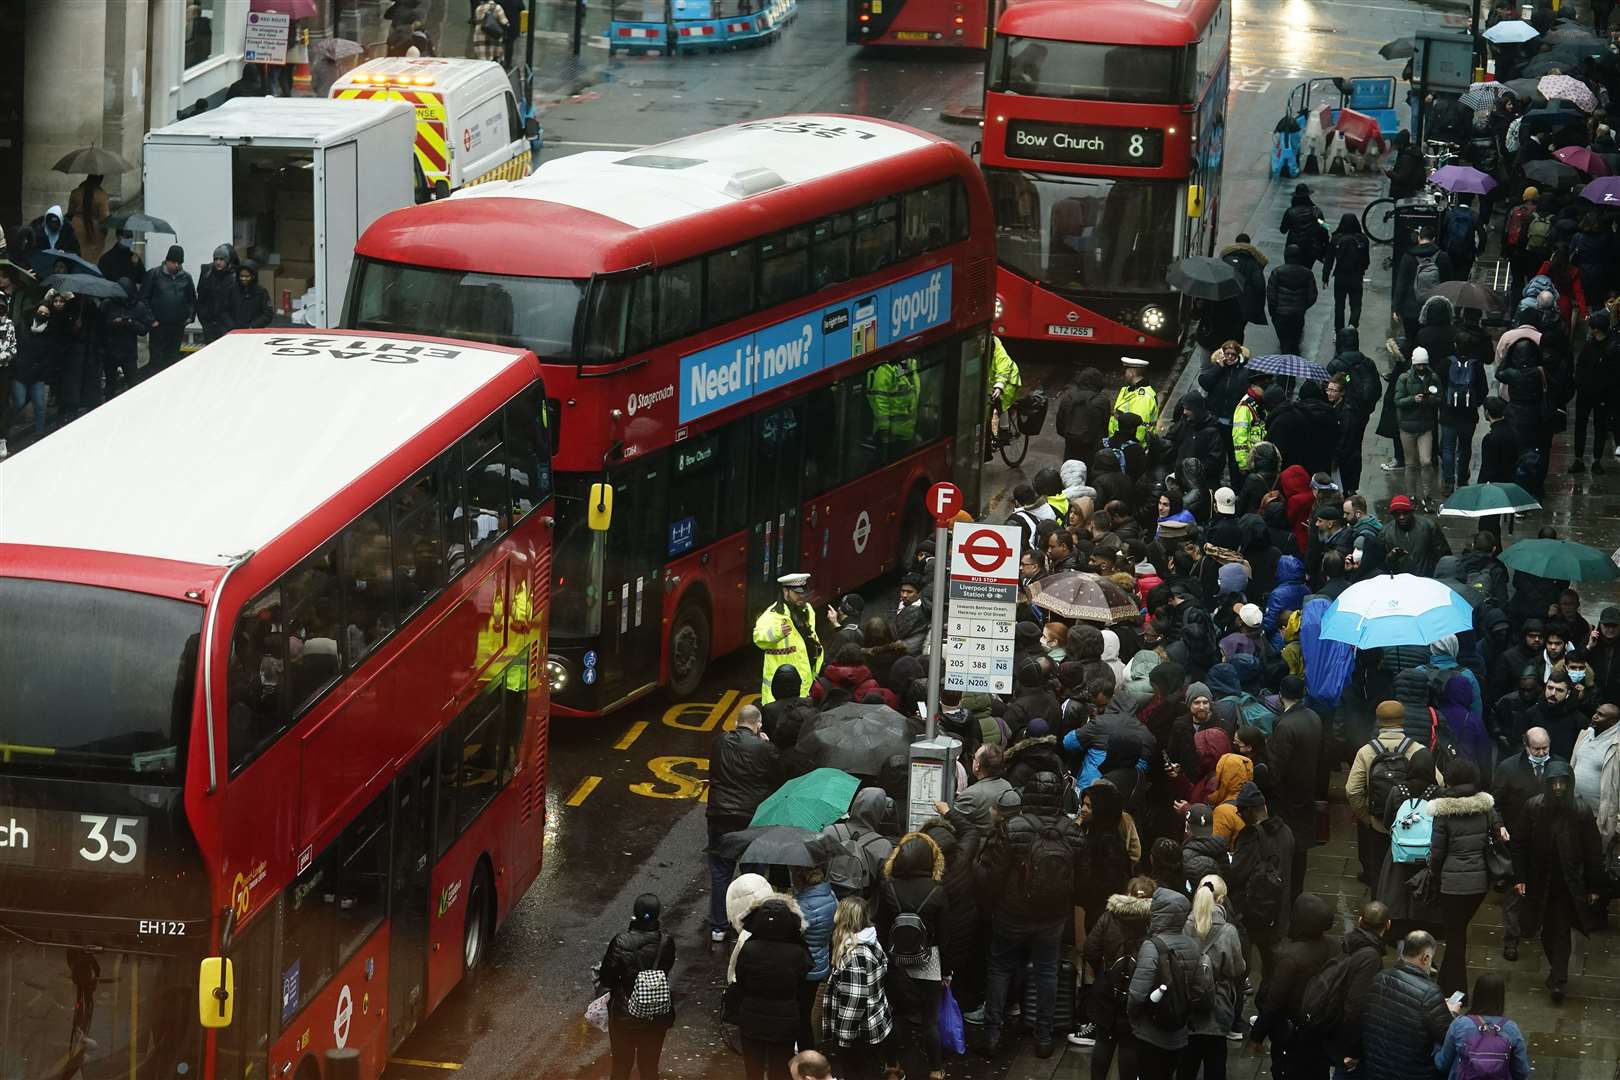 People wait to get on buses at Liverpool Street station in central London on Tuesday (Aaron Chown/PA